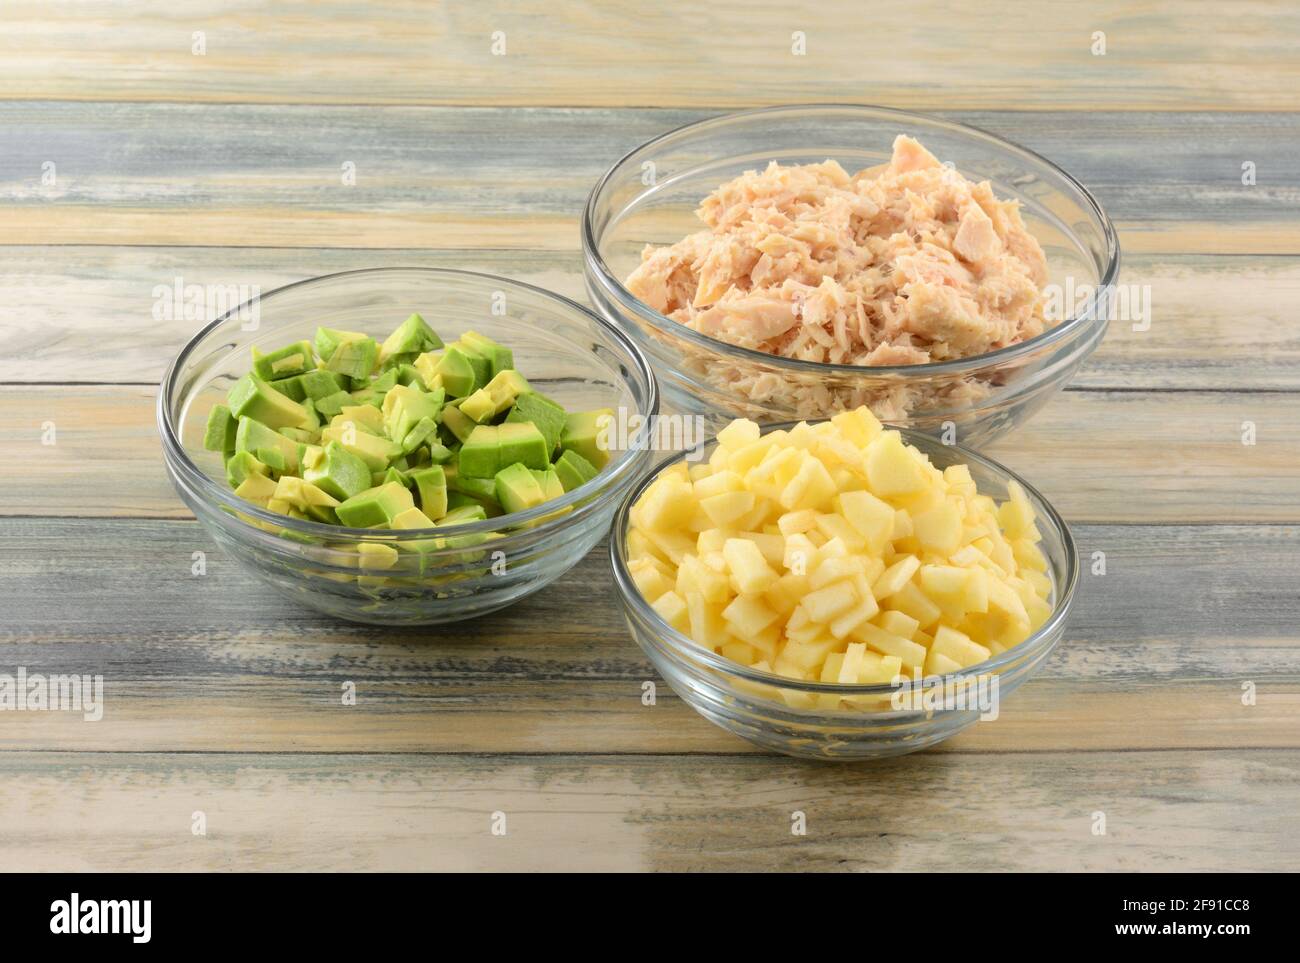 Chopped avocado, apple and albacore tuna soaked in glass ingredient bowls for preparing tuna salad Stock Photo